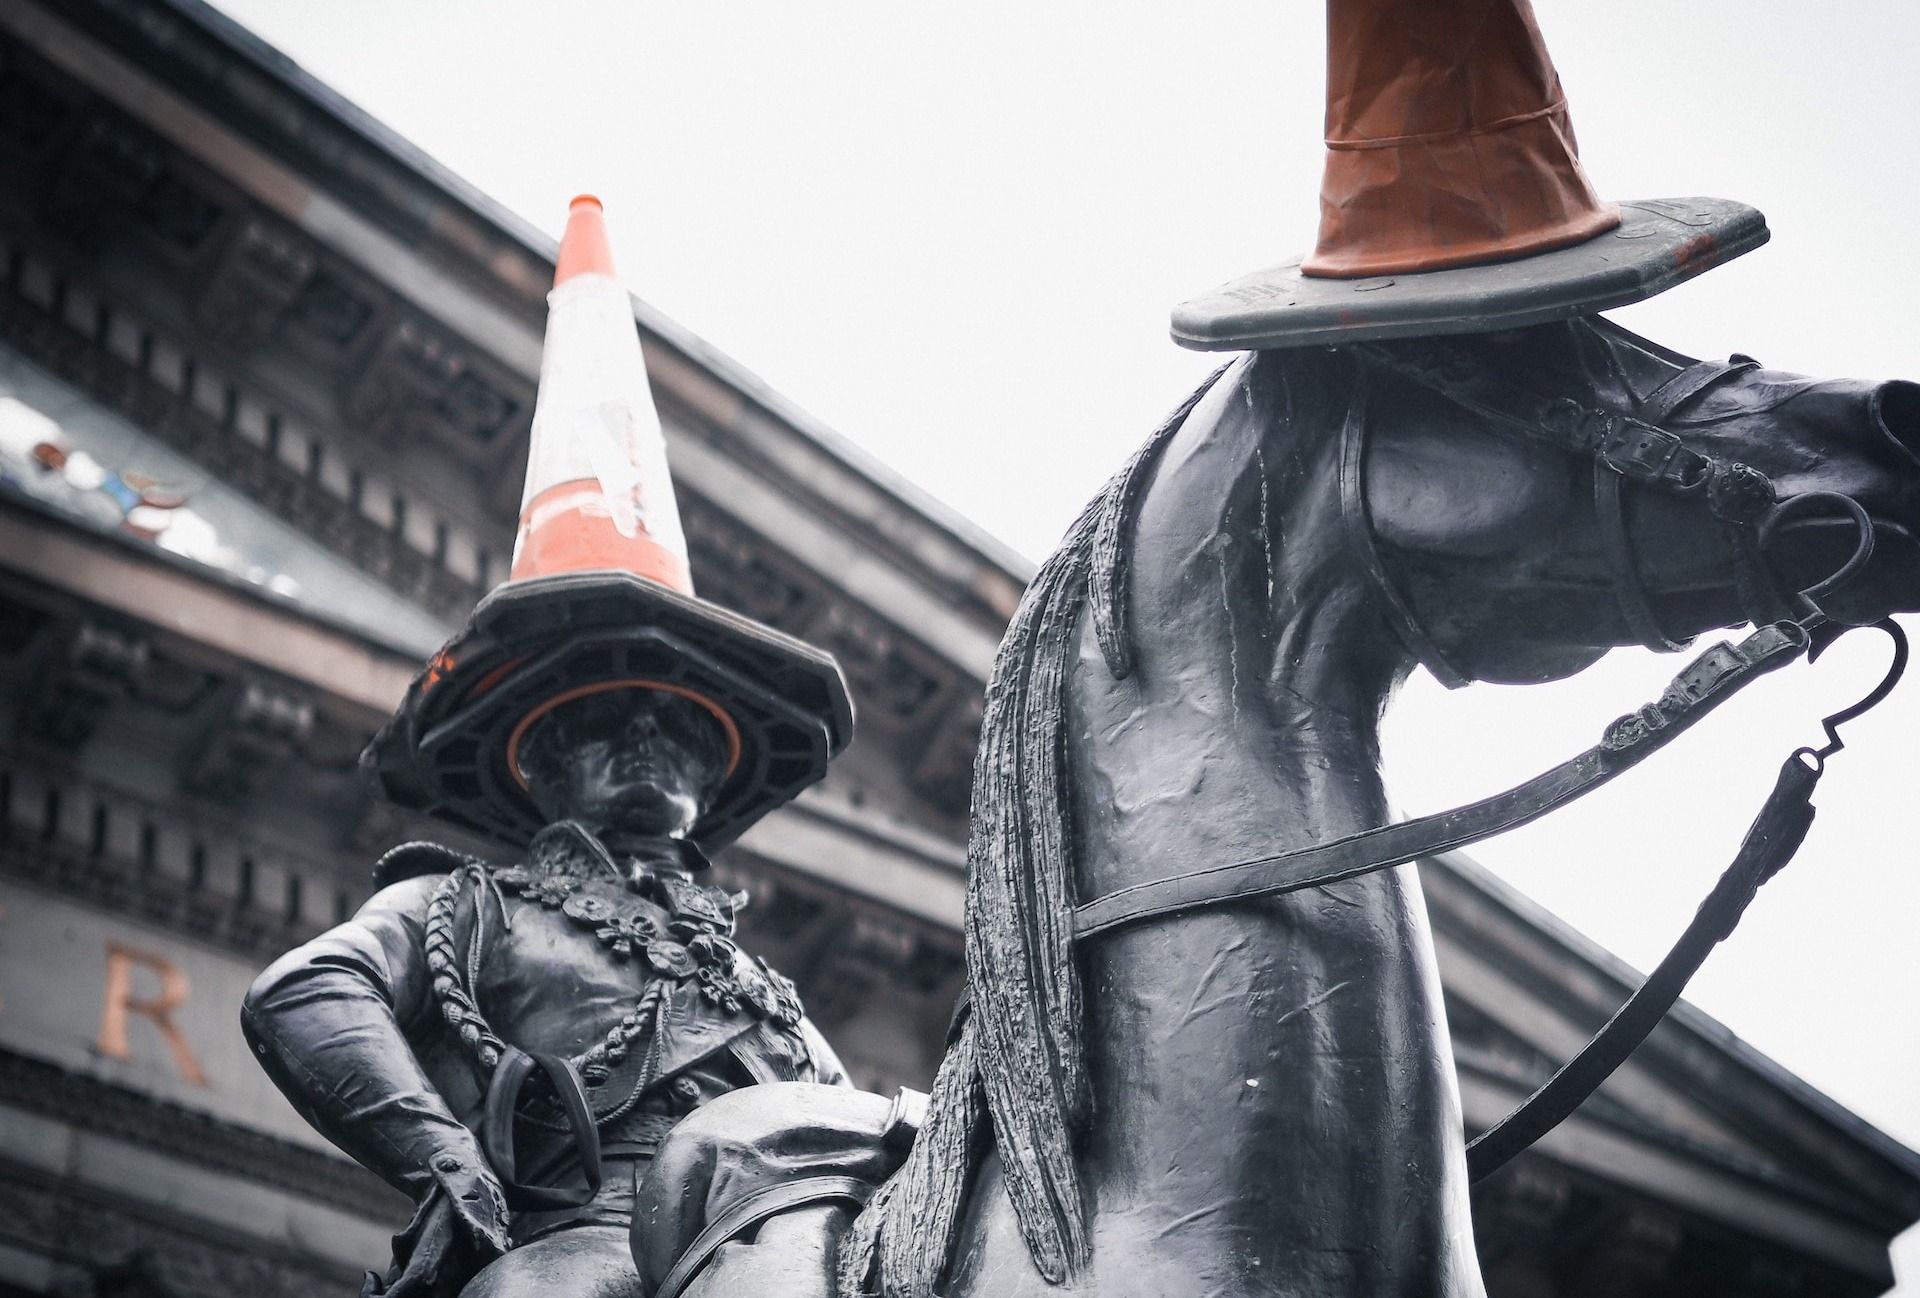 The Duke of Wellington on his trusty steed, outside the Gallery of Modern Art (GOMA) in Glasgow (Photo by Liza Pooor on Unsplash)